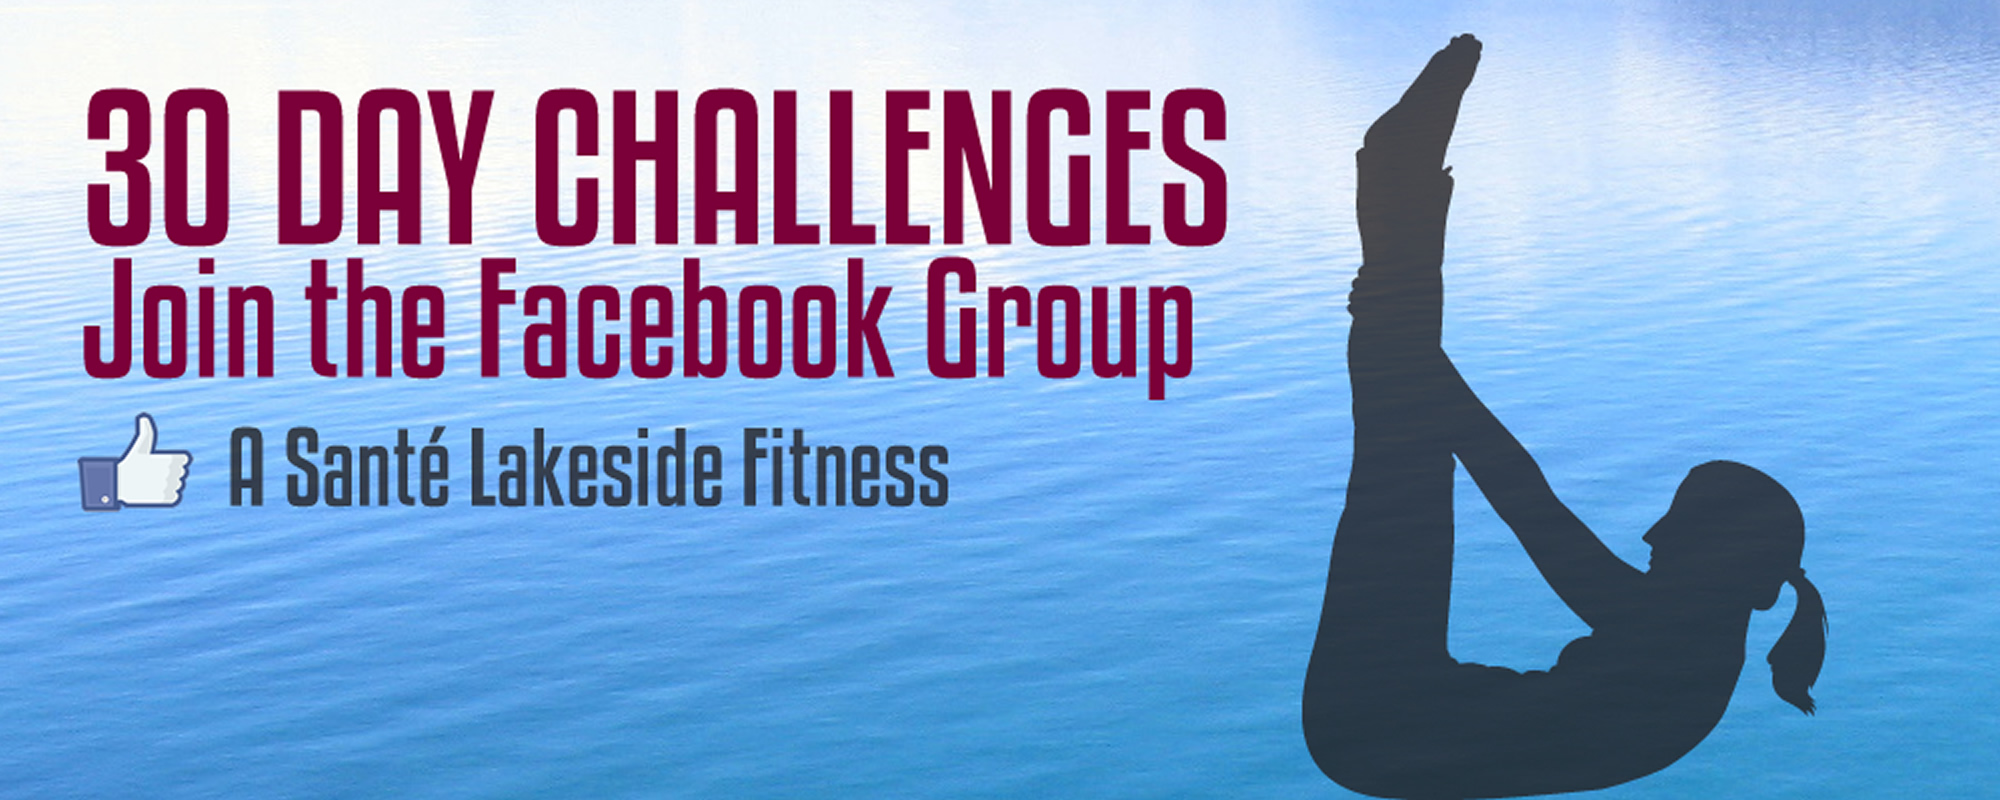 facebook group challenges